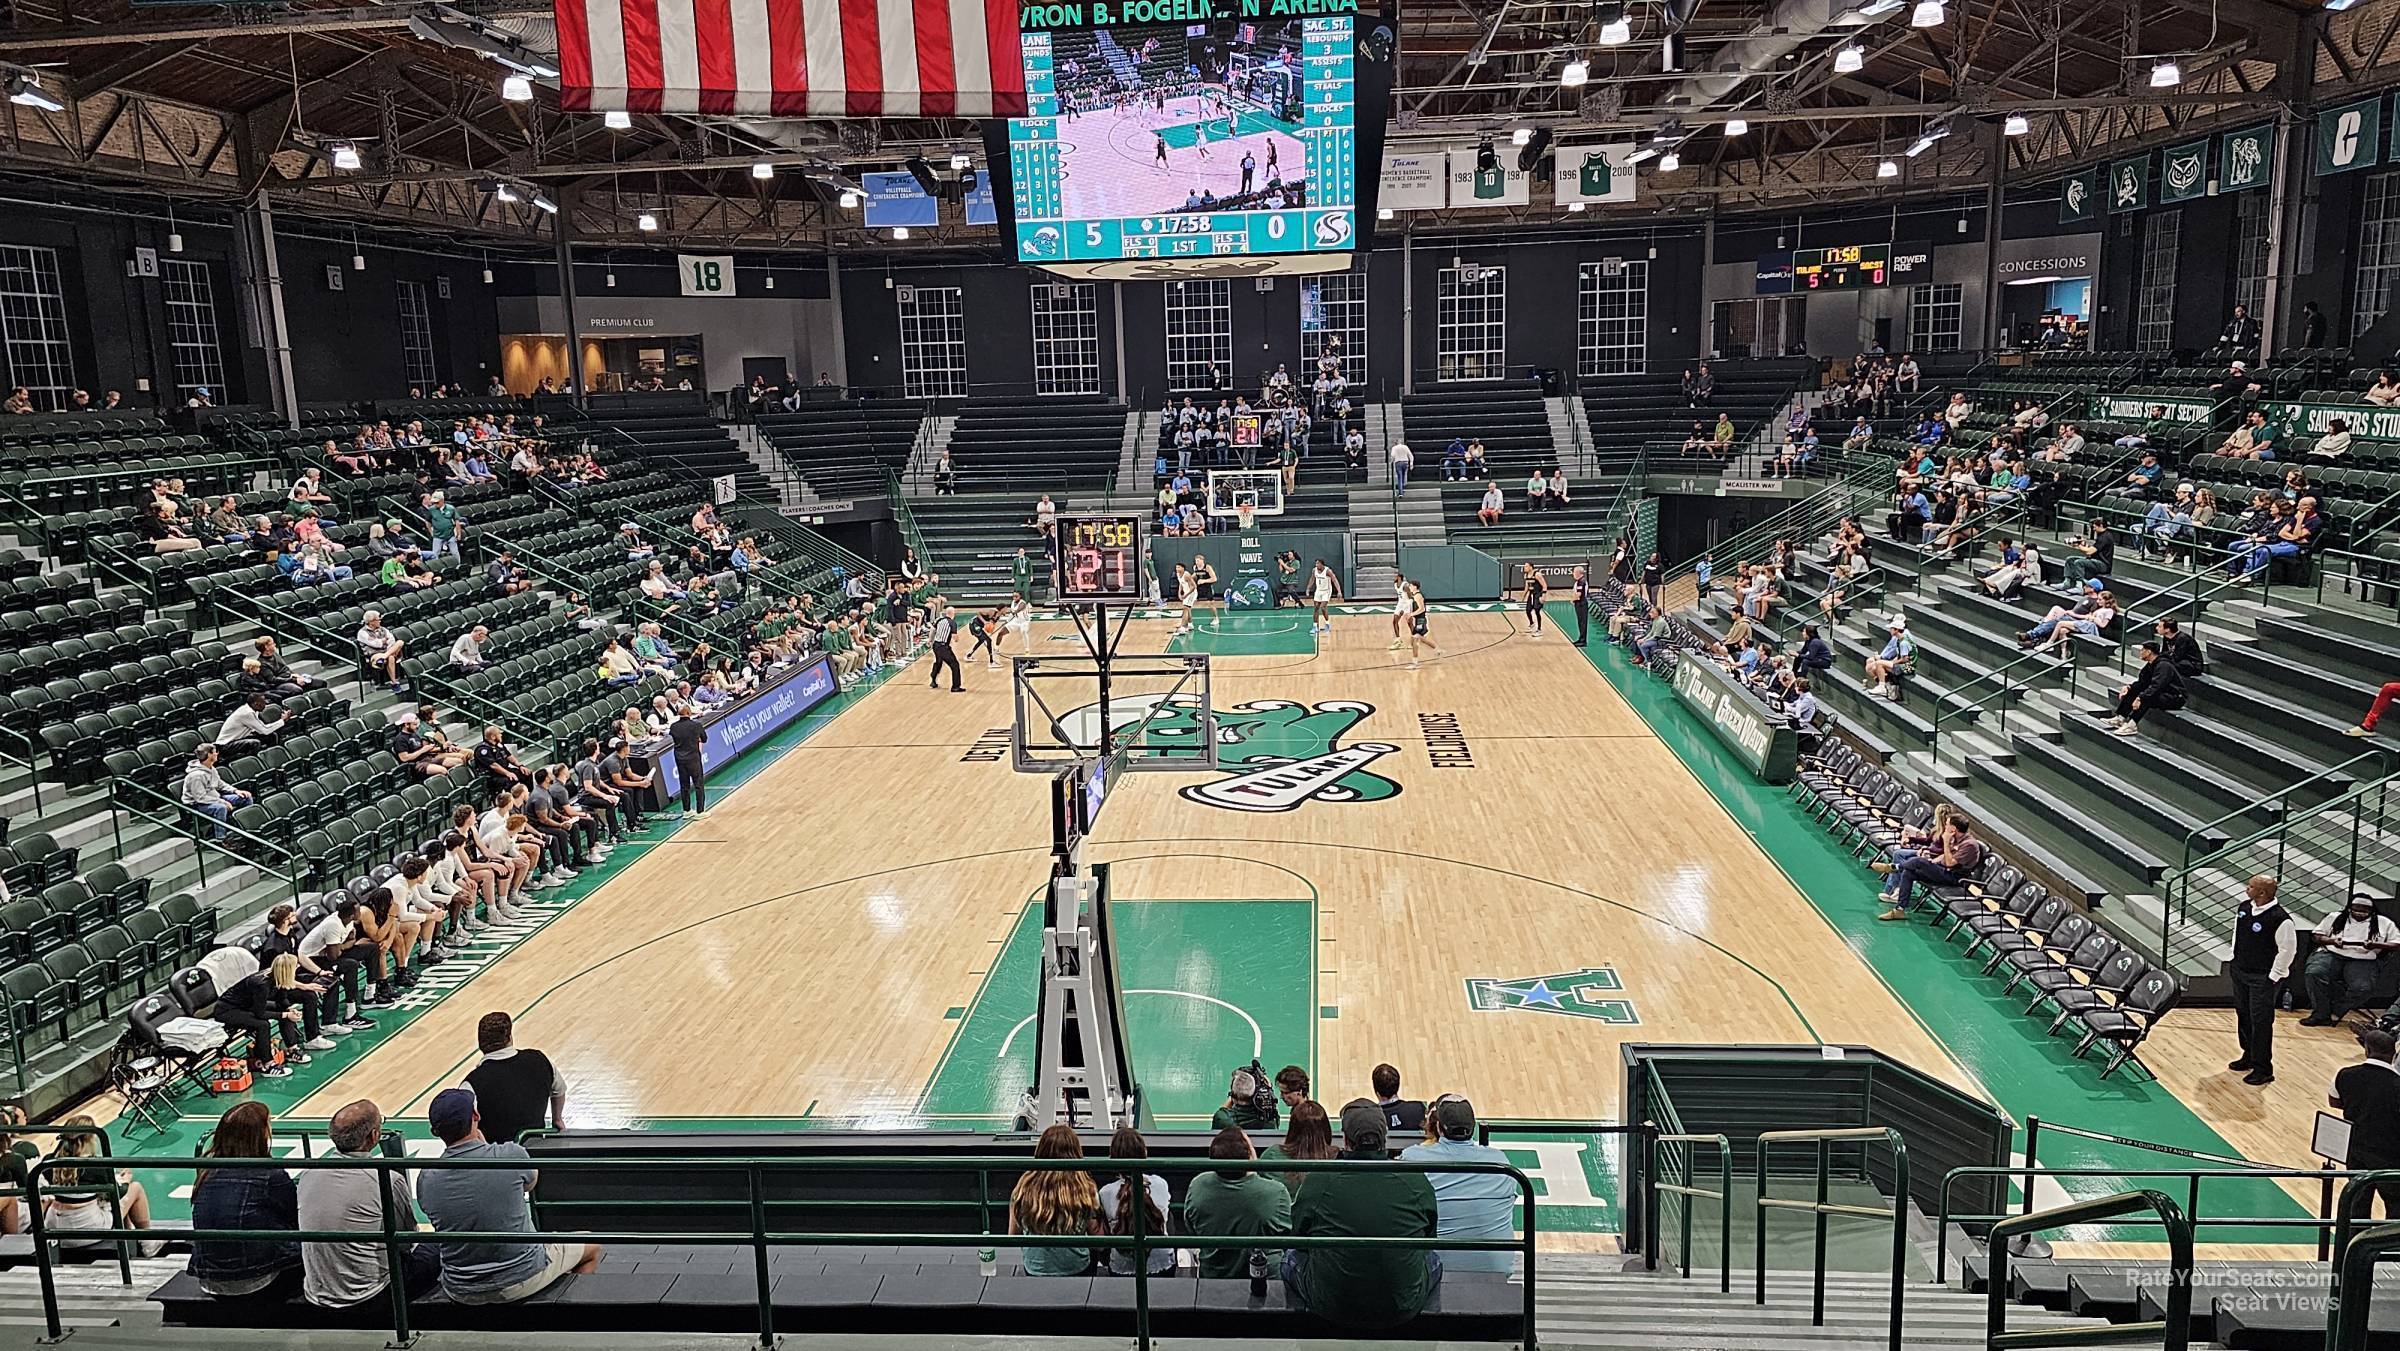 section p, row 17 seat view  - devlin fieldhouse